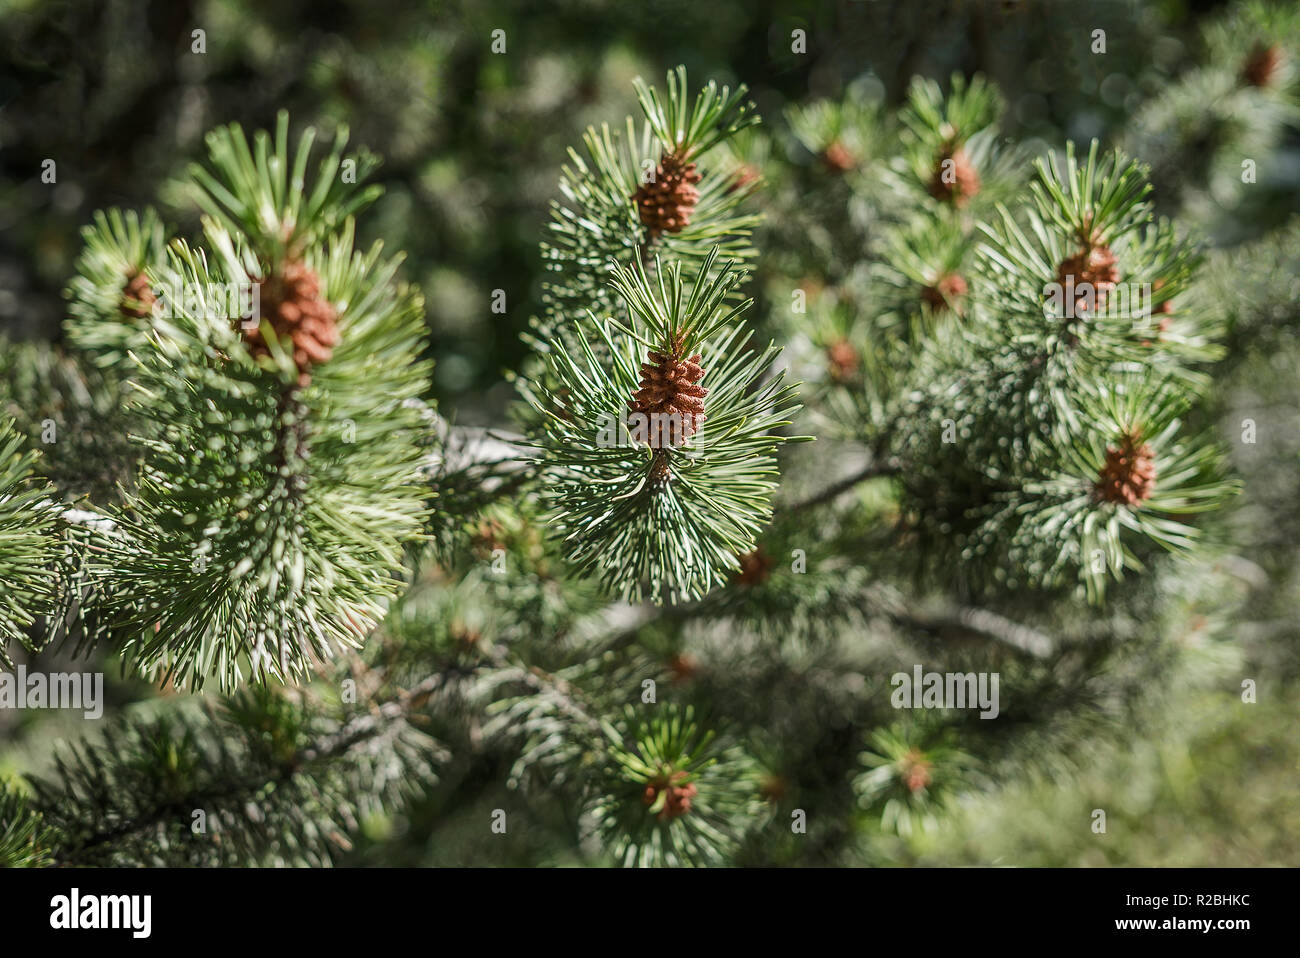 Closeup of a fresh smelling fir tree branches in the woods springtime in sunlight with green prickly needles and new brown cone buds on the tip Stock Photo